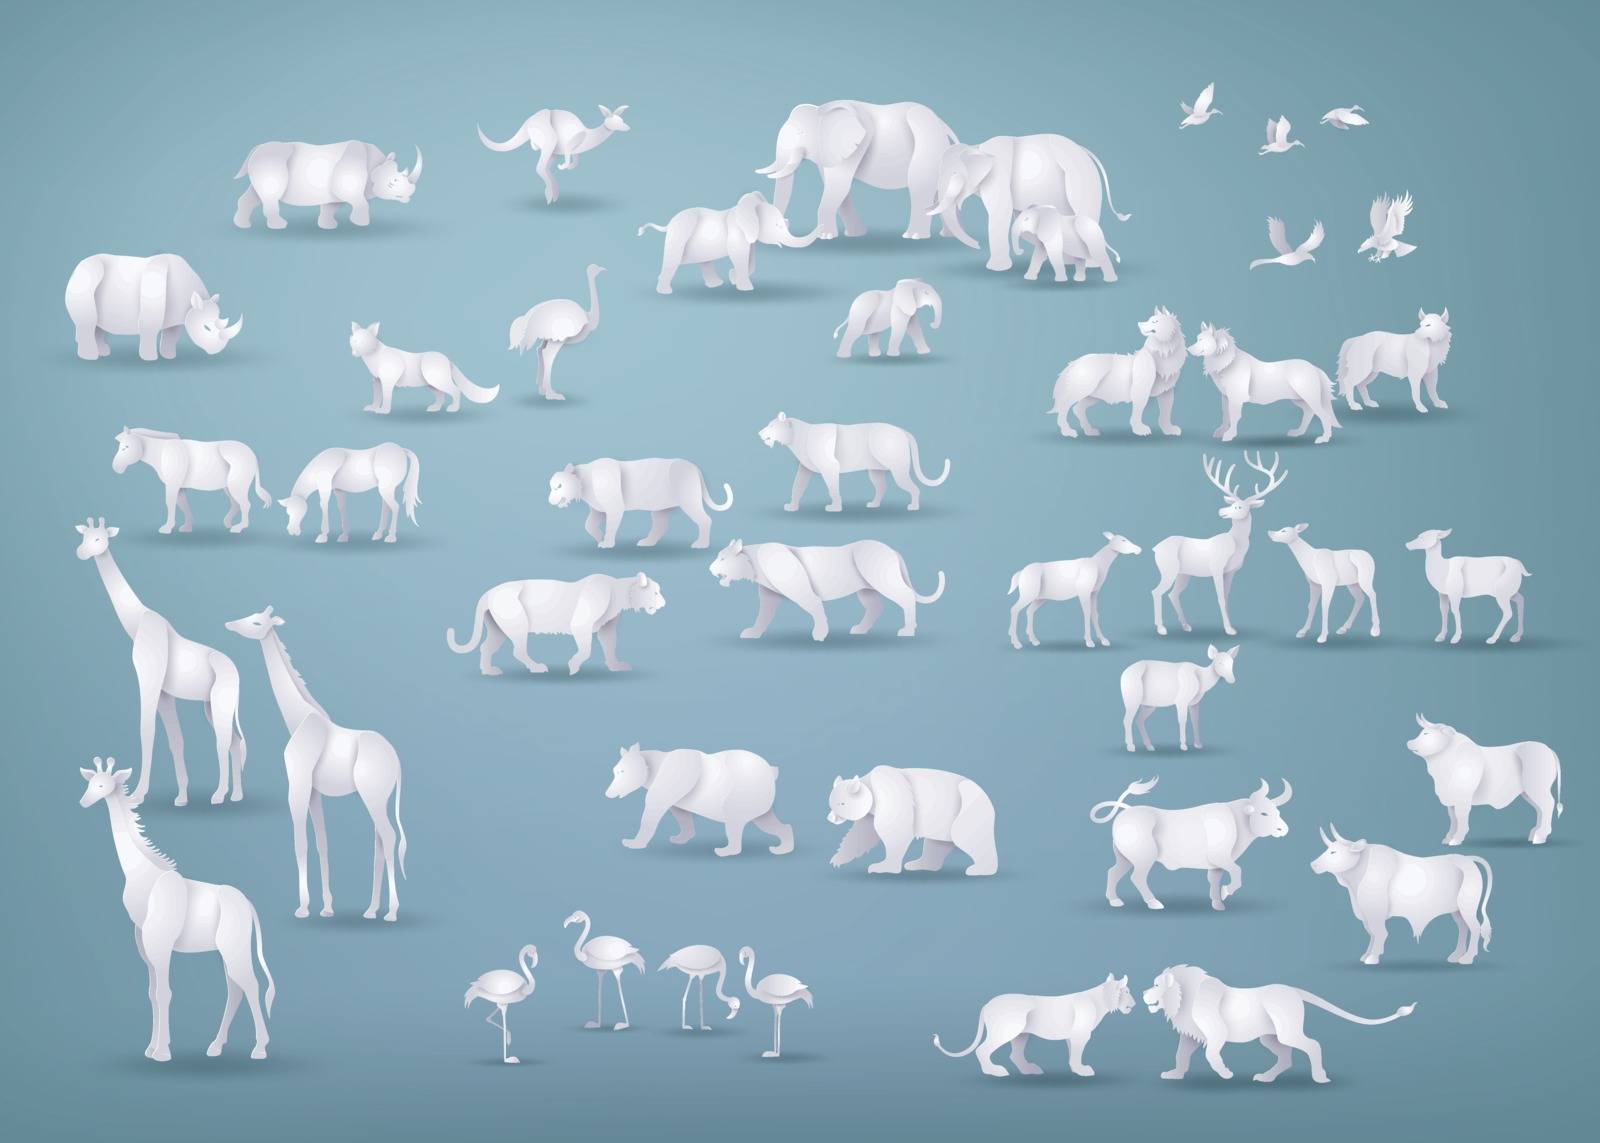 Illustration of wild animals in many types ,paper art and origami style.